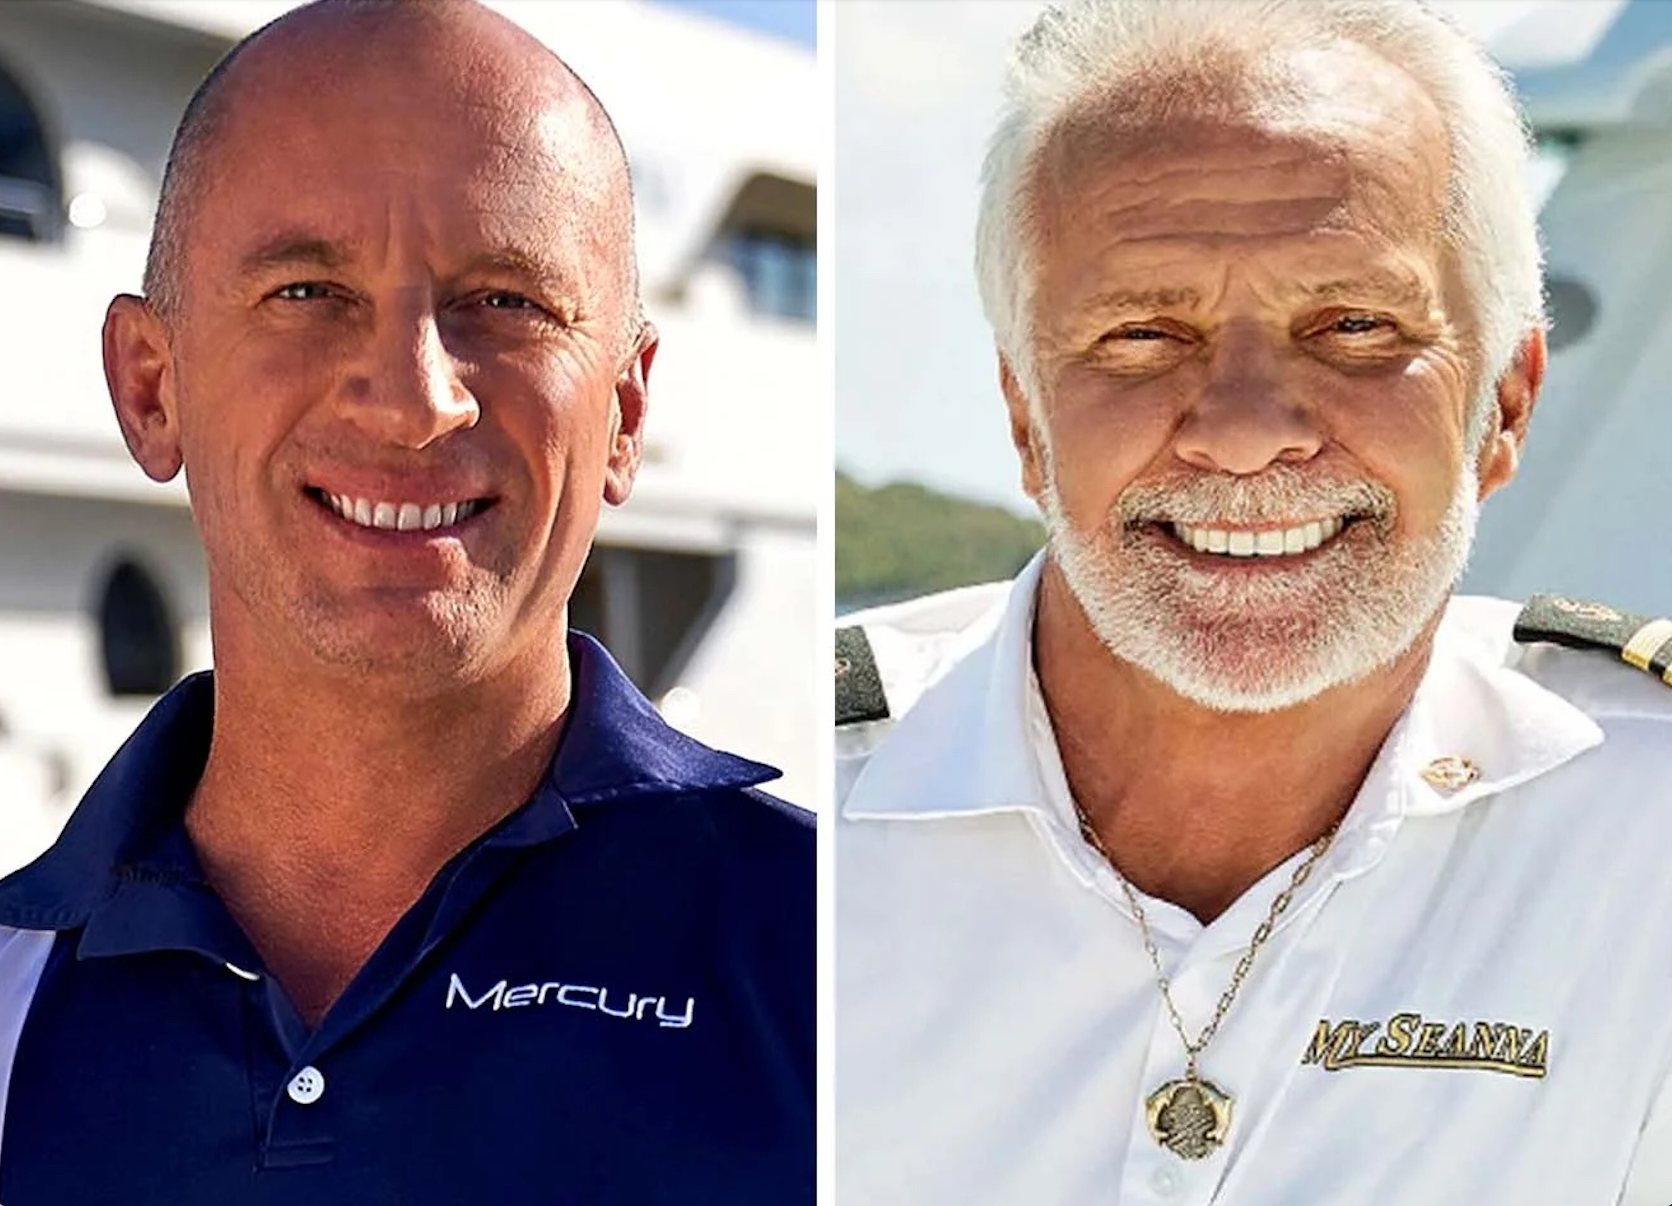 Captain Kerry Titheradge Taking Over for Captain Lee Rosbach in ‘Below Deck’ Cast Shakeup